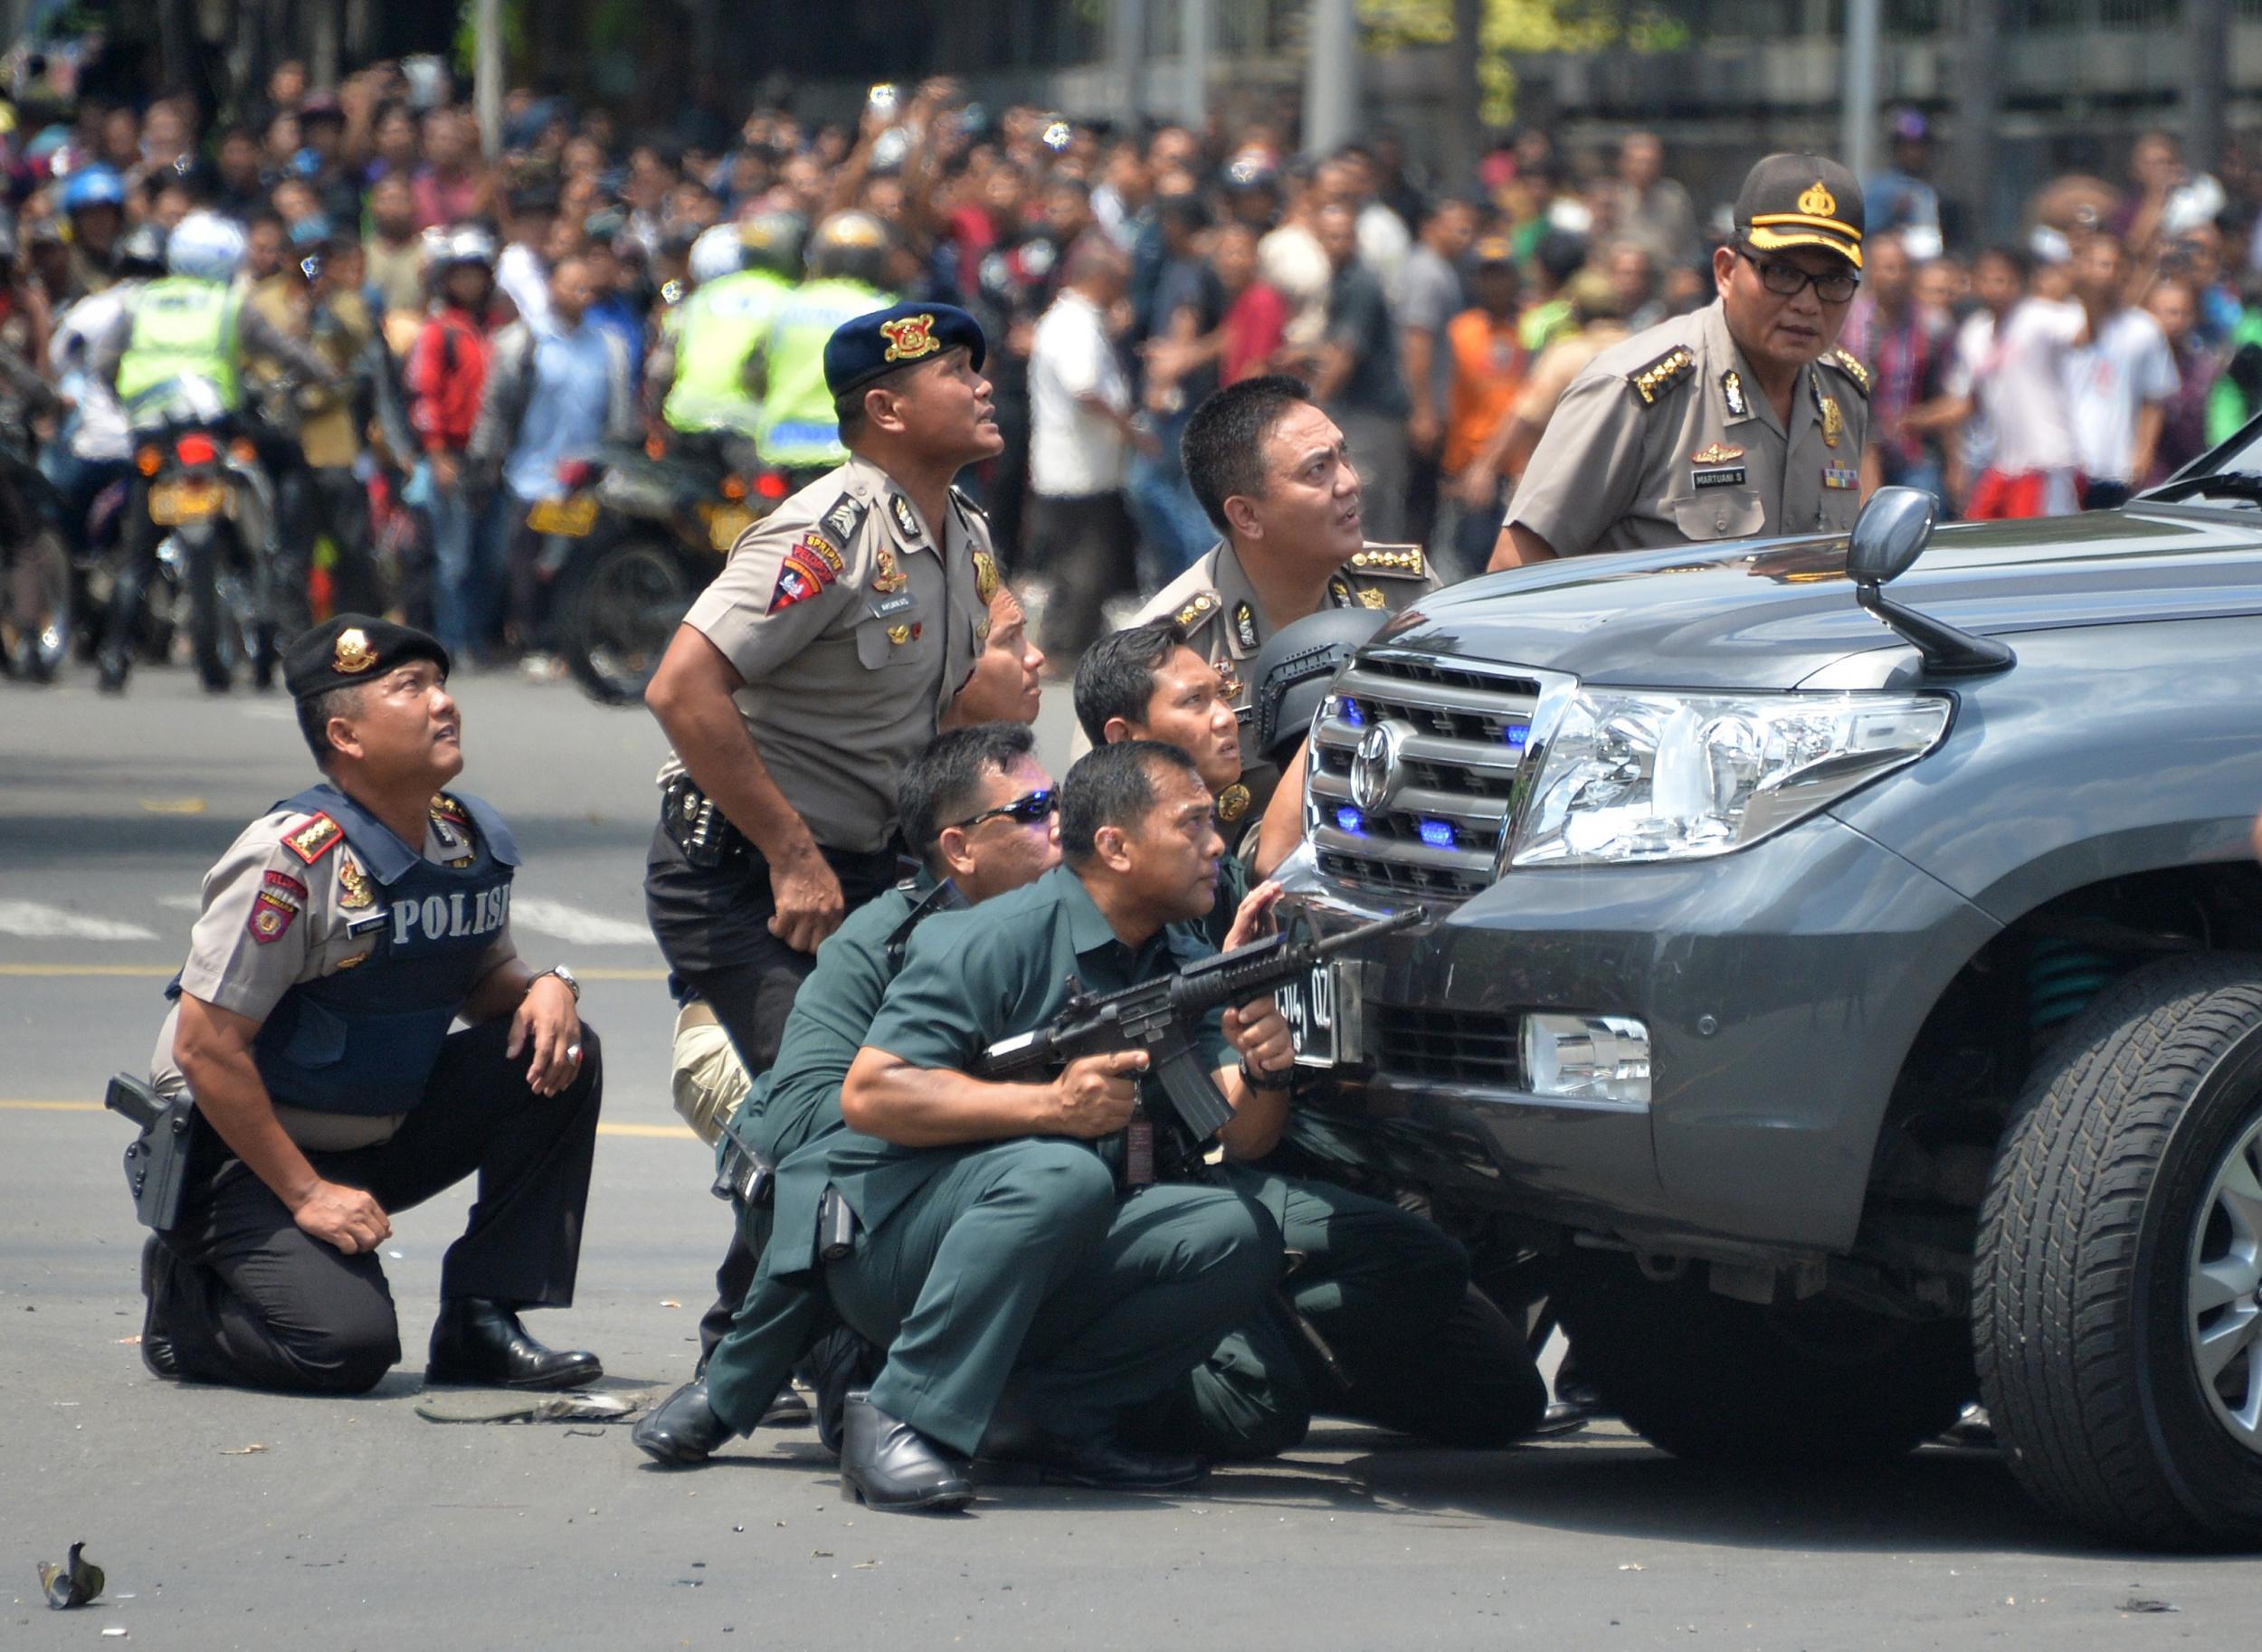 Police officers react near the site of a blast in Jakarta